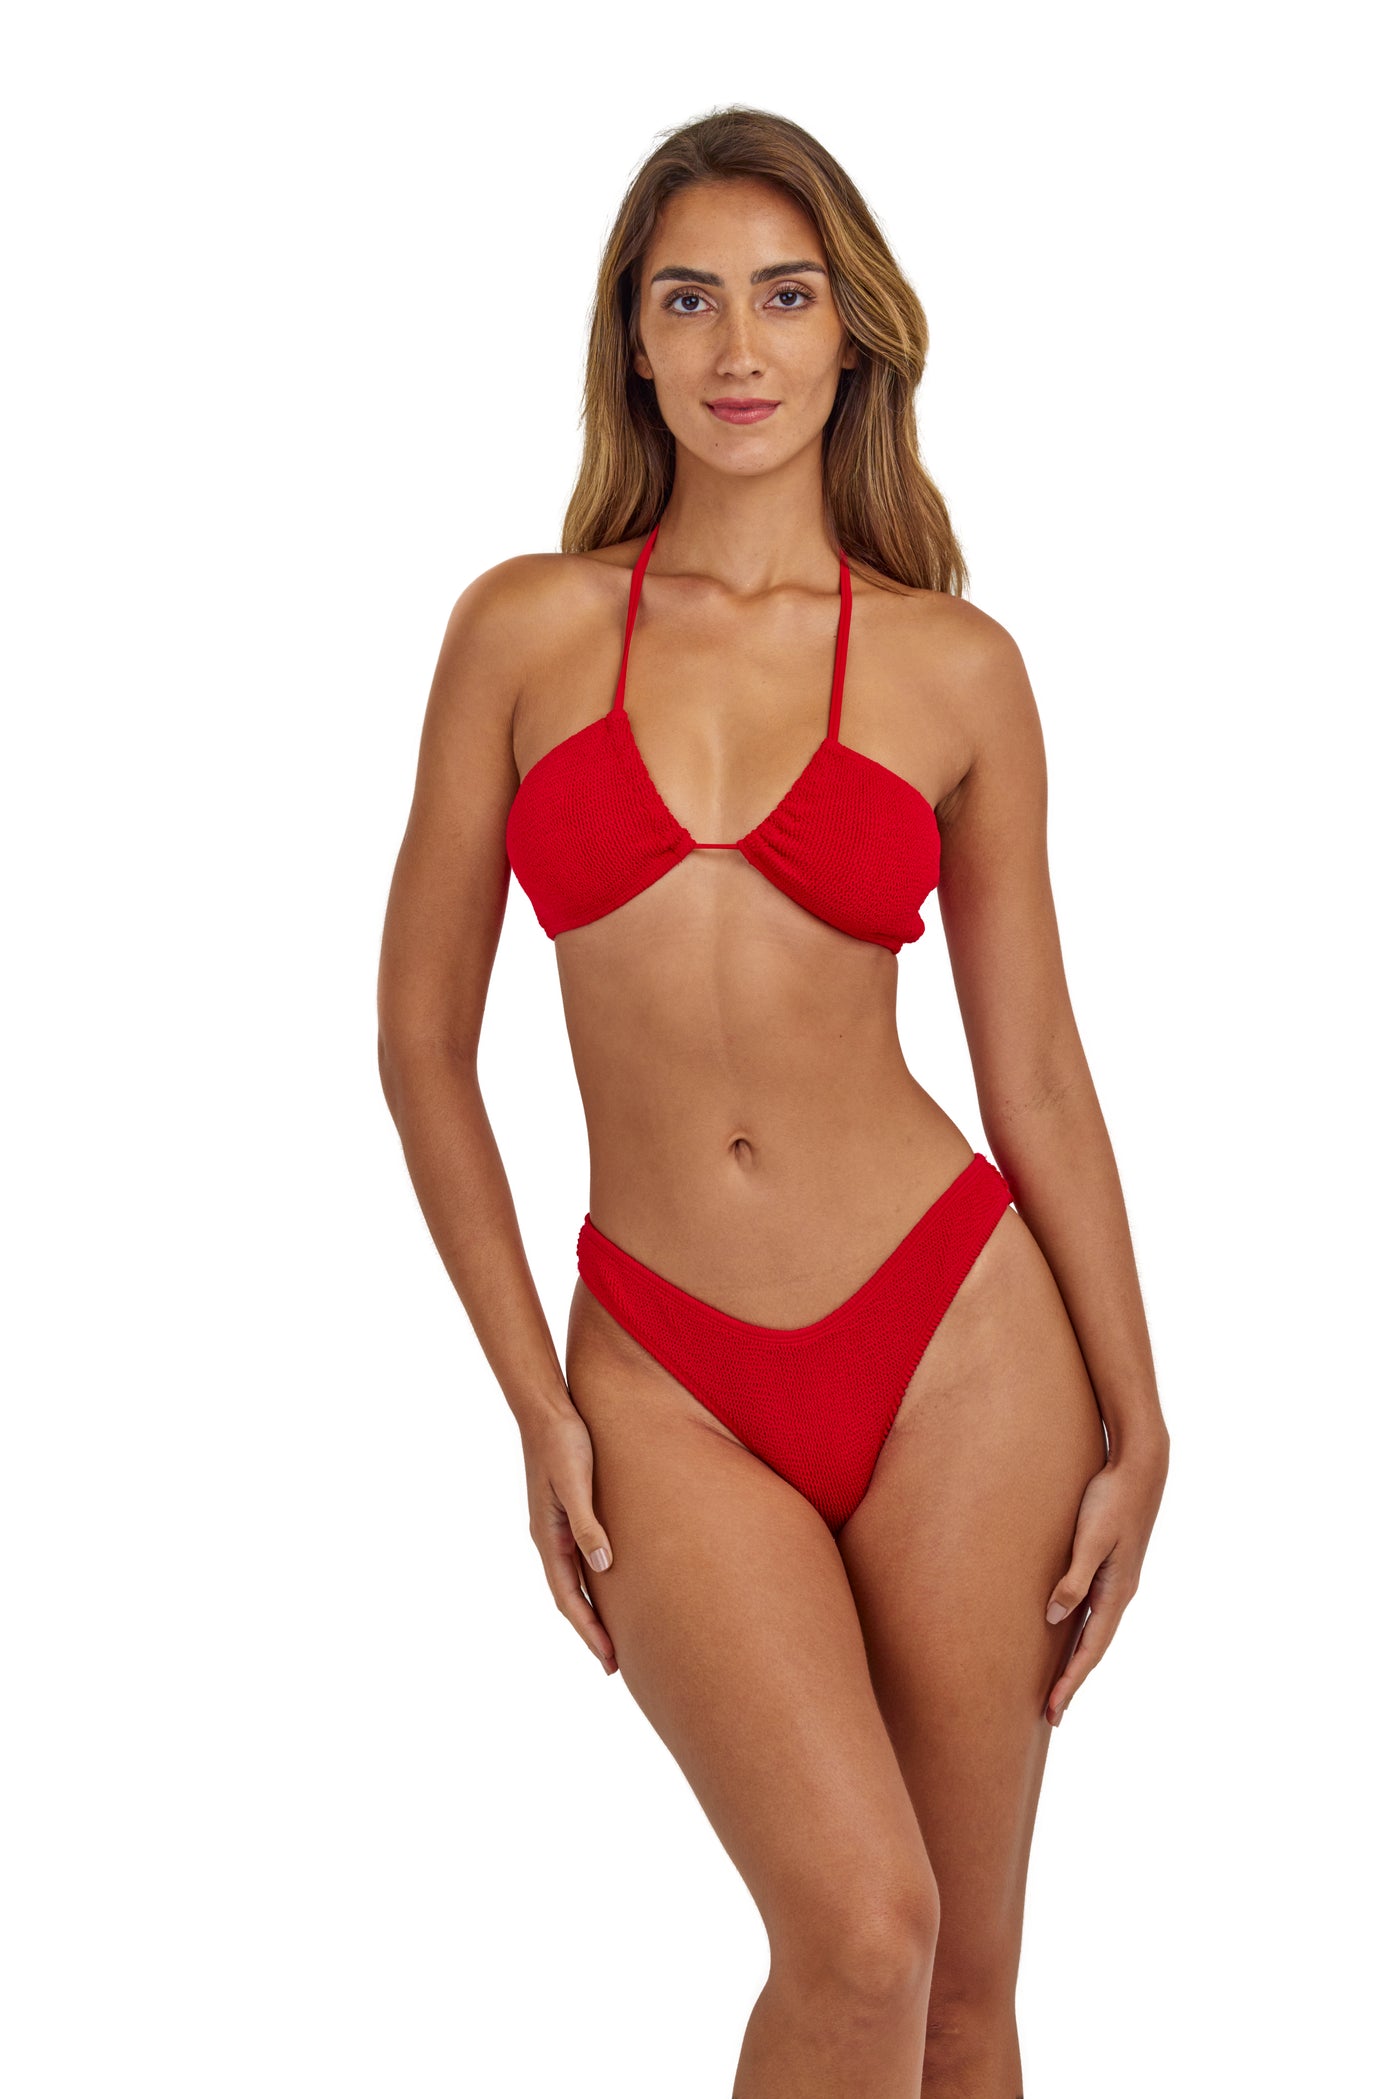 Venice Multi Style String One Size Bikini TOP ONLY with clasp